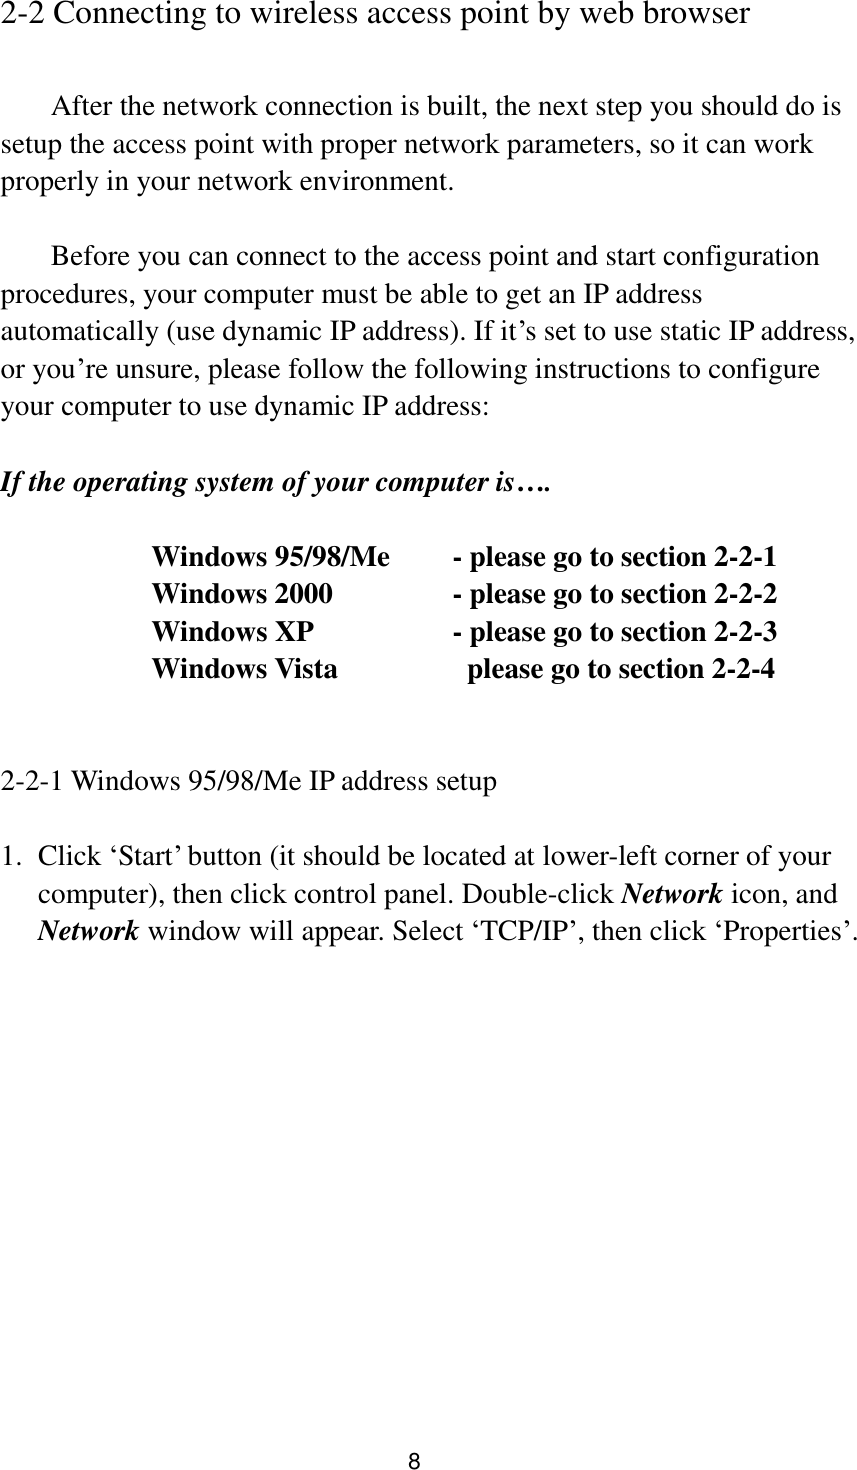 8 2-2 Connecting to wireless access point by web browser    After the network connection is built, the next step you should do is setup the access point with proper network parameters, so it can work properly in your network environment.    Before you can connect to the access point and start configuration procedures, your computer must be able to get an IP address automatically (use dynamic IP address). If it‟s set to use static IP address, or you‟re unsure, please follow the following instructions to configure your computer to use dynamic IP address:  If the operating system of your computer is….     Windows 95/98/Me    - please go to section 2-2-1       Windows 2000         - please go to section 2-2-2         Windows XP      - please go to section 2-2-3       Windows Vista        please go to section 2-2-4   2-2-1 Windows 95/98/Me IP address setup  1. Click „Start‟ button (it should be located at lower-left corner of your computer), then click control panel. Double-click Network icon, and Network window will appear. Select „TCP/IP‟, then click „Properties‟.  